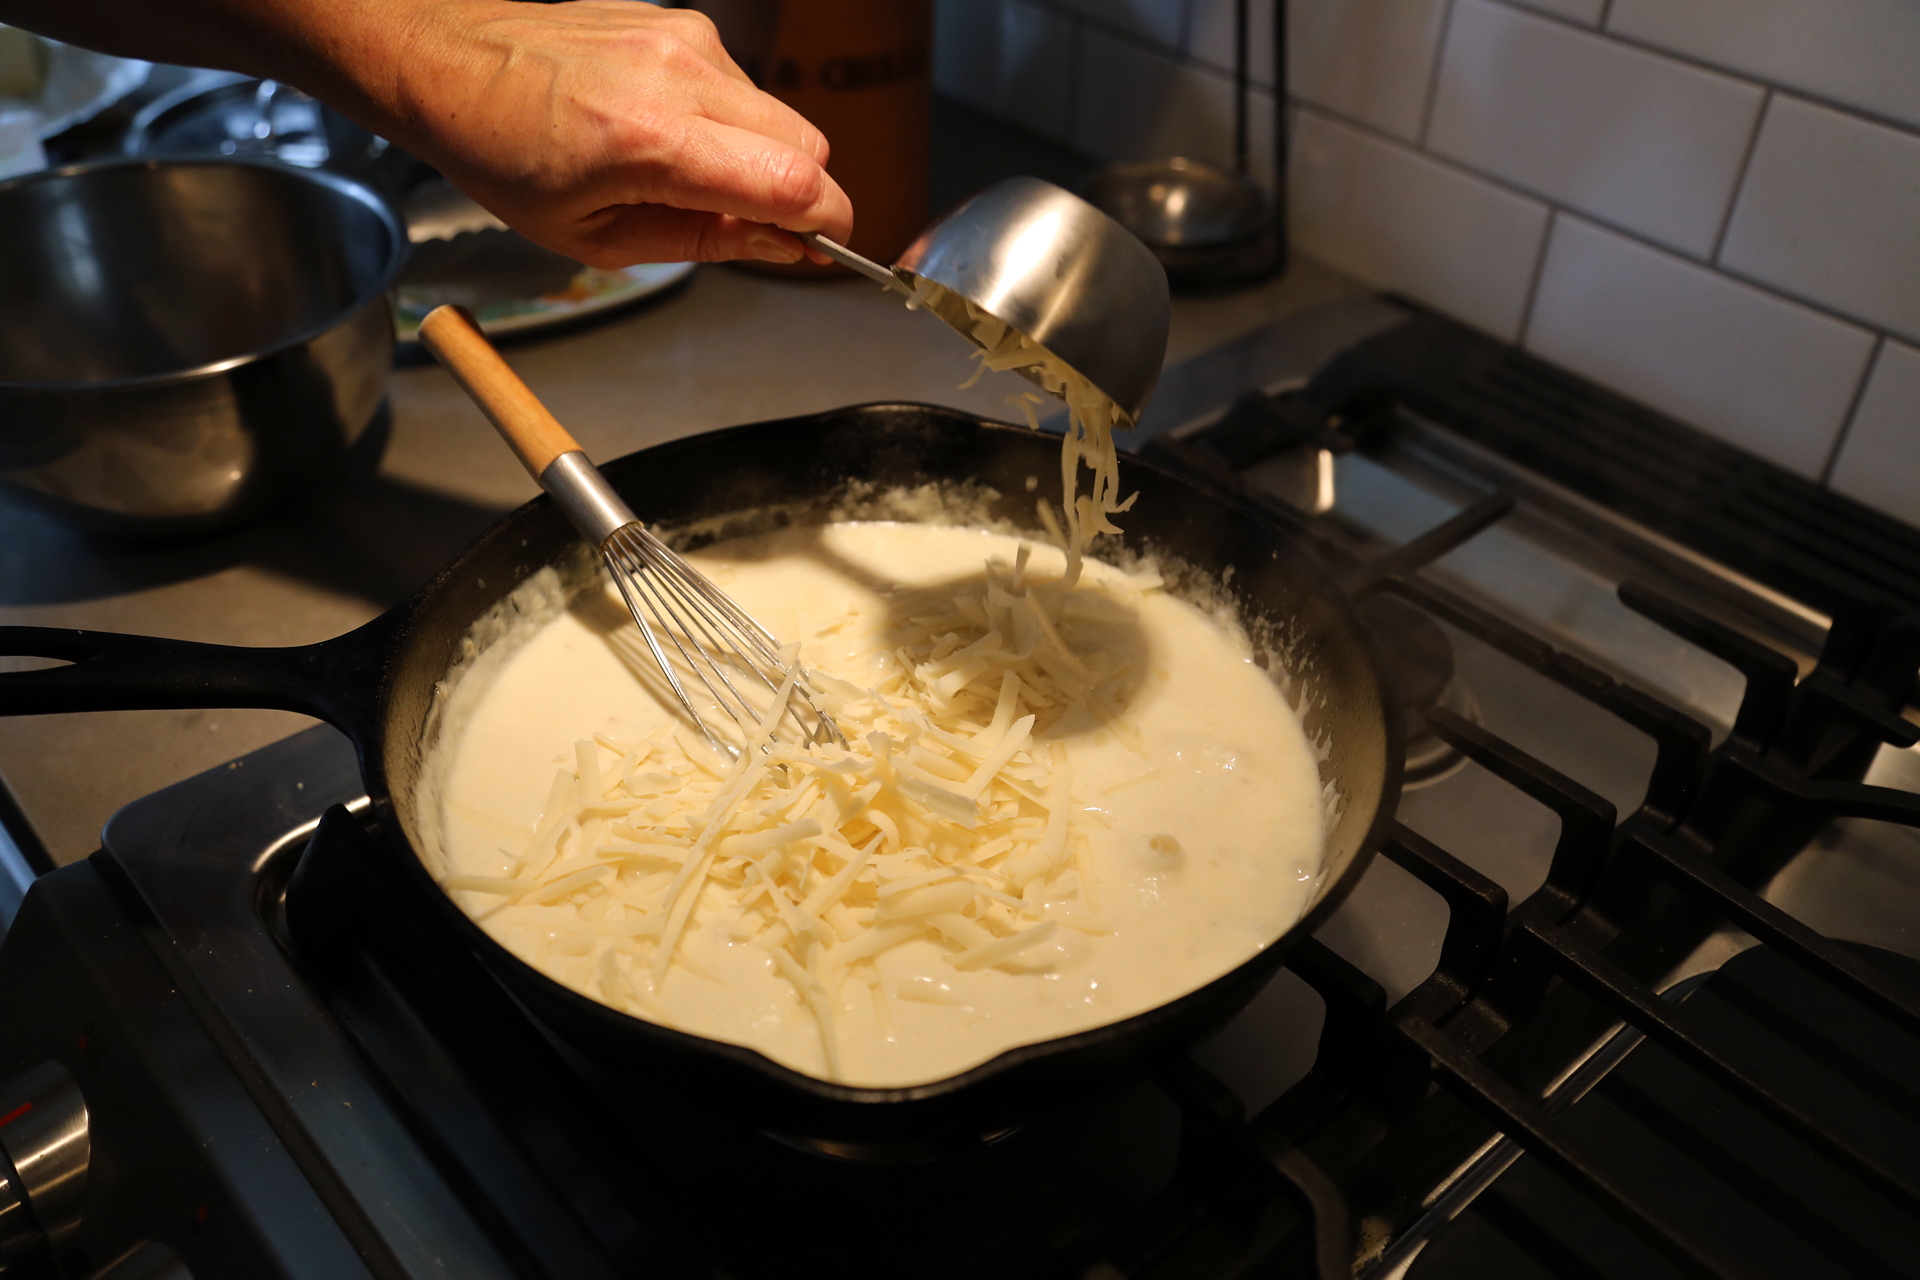 After the sauce thickens, sprinkle in the gruyere, stirring until melted and smooth.